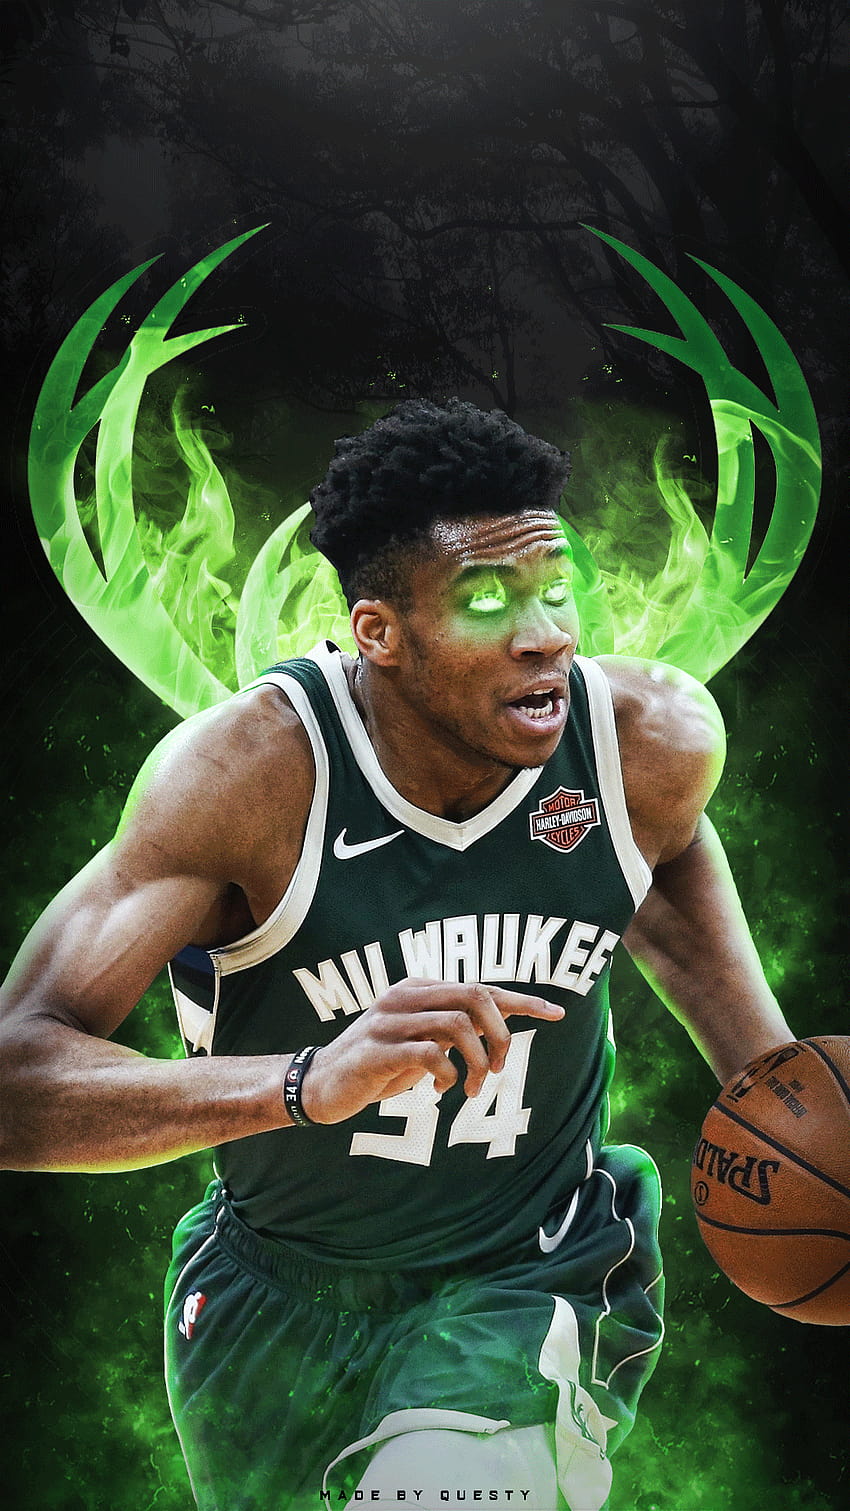 giannis antetokounmpo iphone , made by @QuestyTv on, giannis antetokounmpo iphone 8 HD phone wallpaper